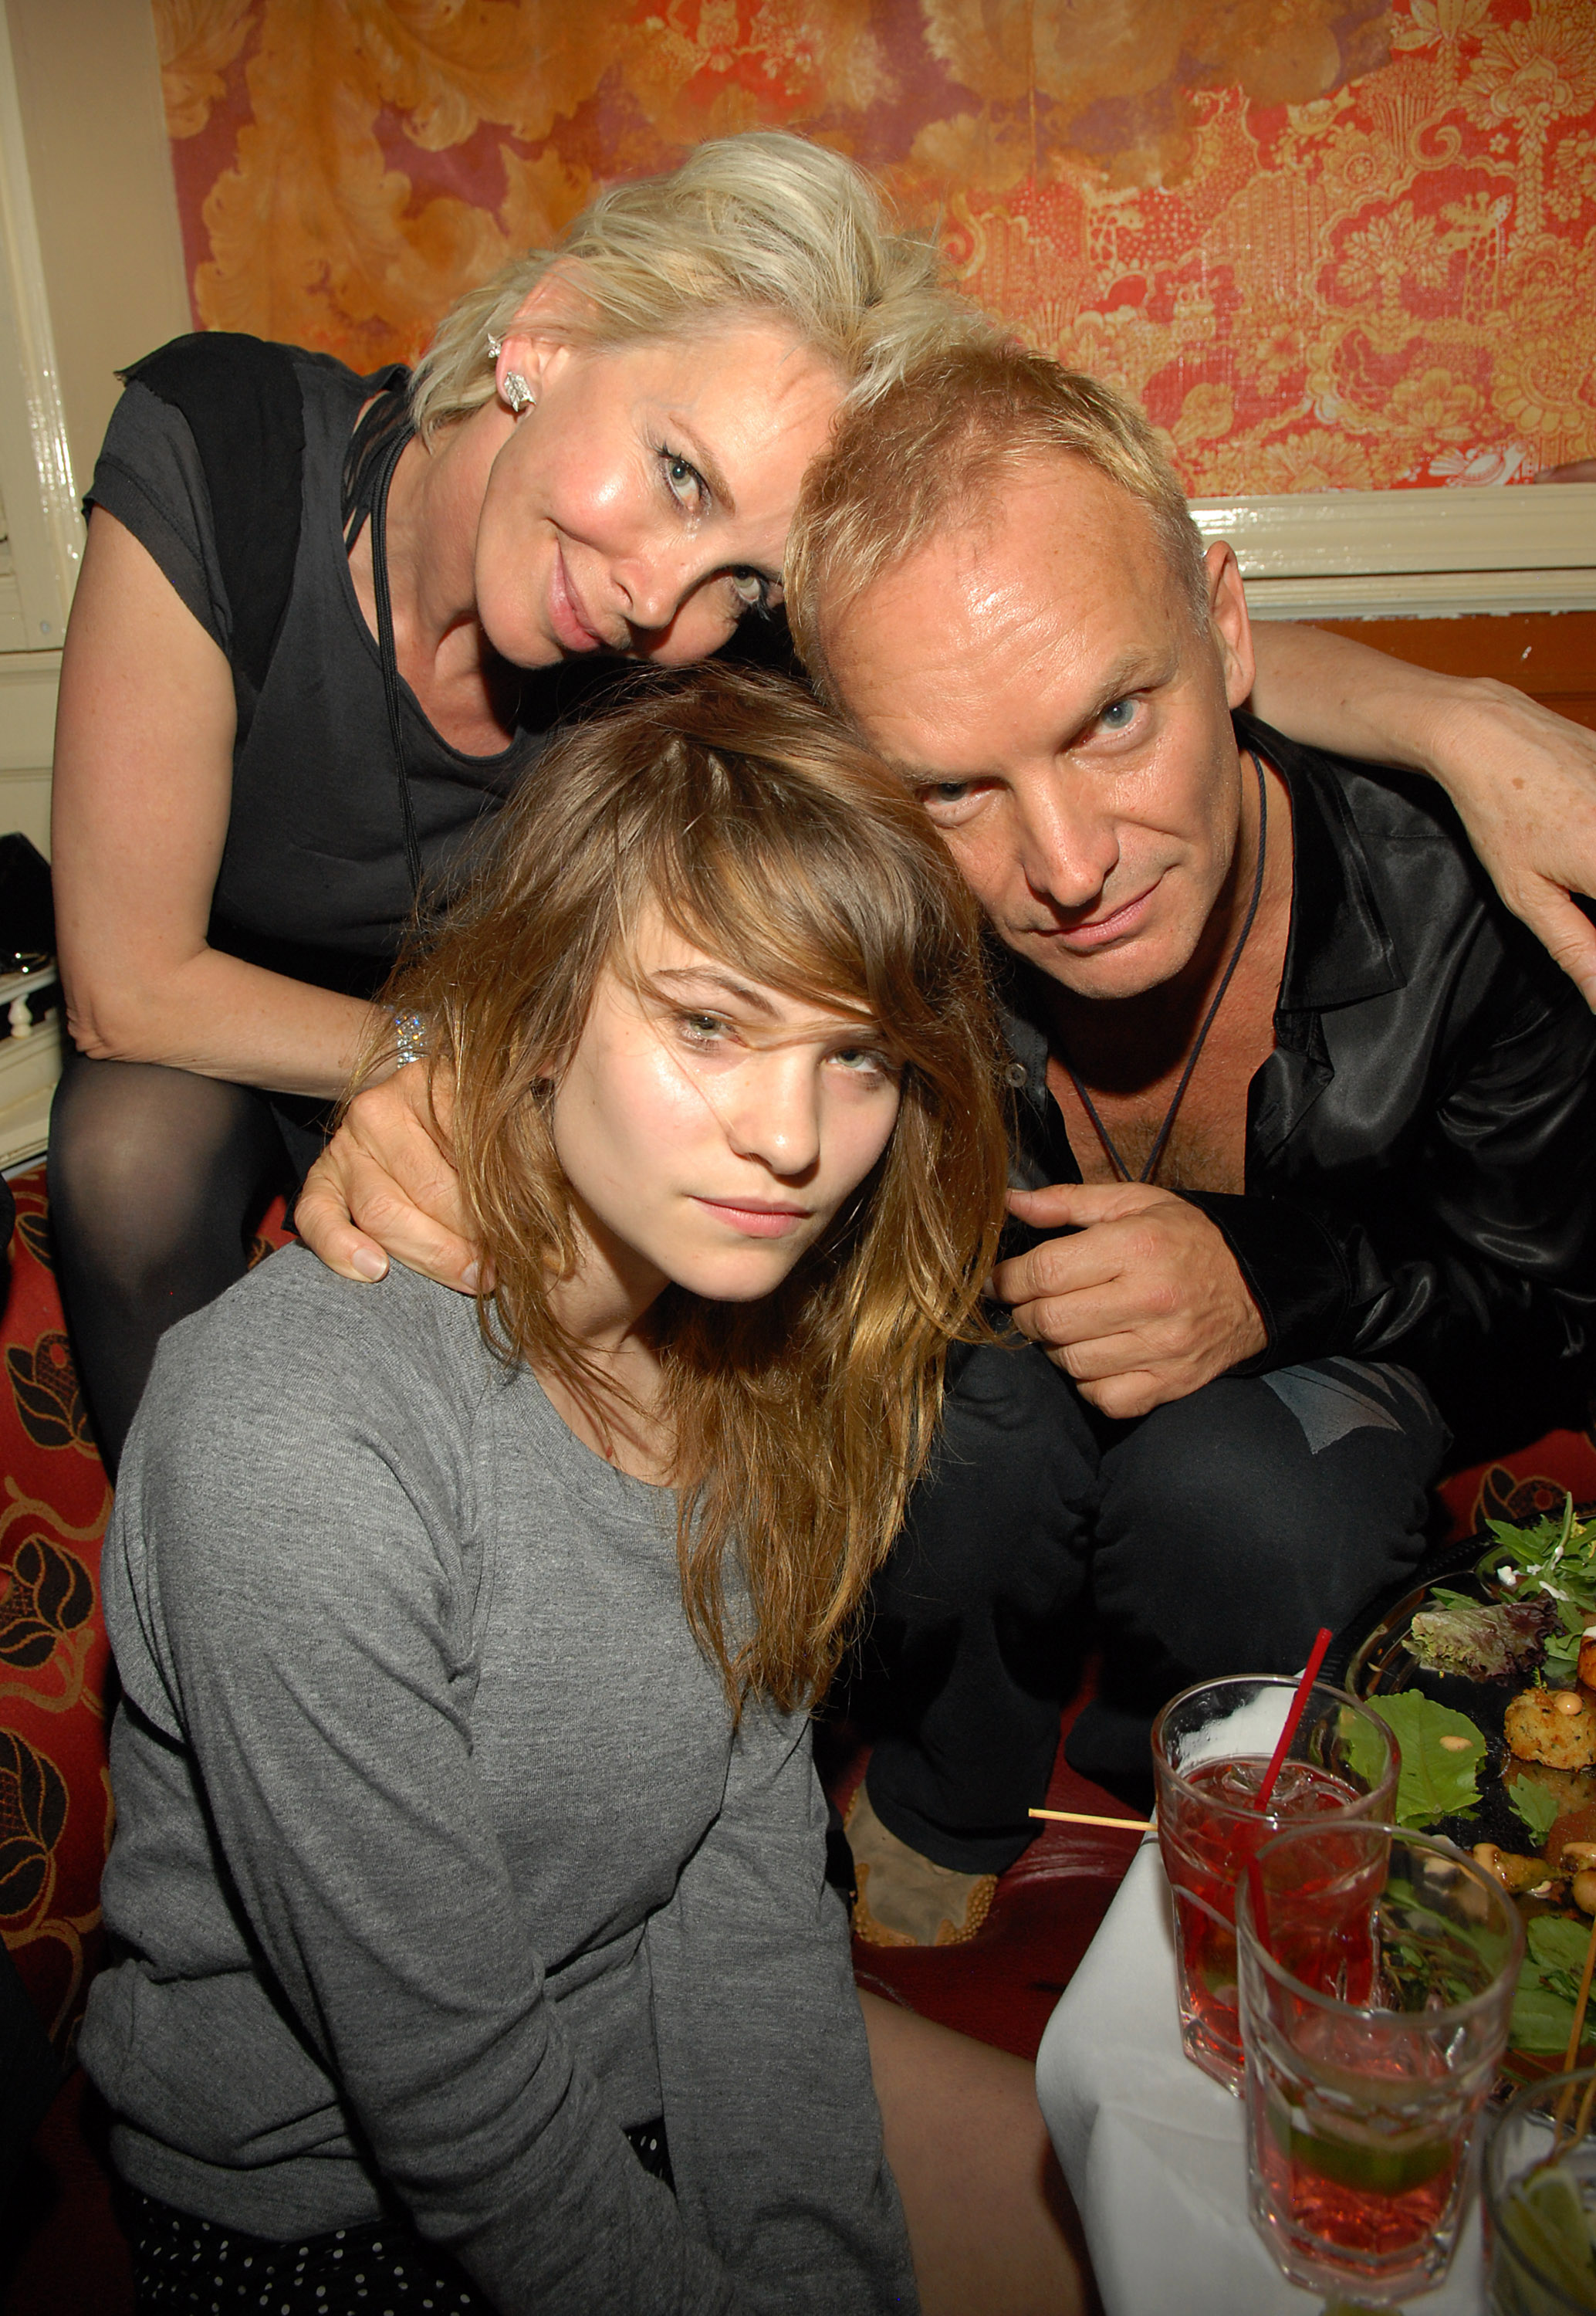 Trudie Styler, Sting, and Eliot Sumner on August 1, 2007 in New York City | Source: Getty Images